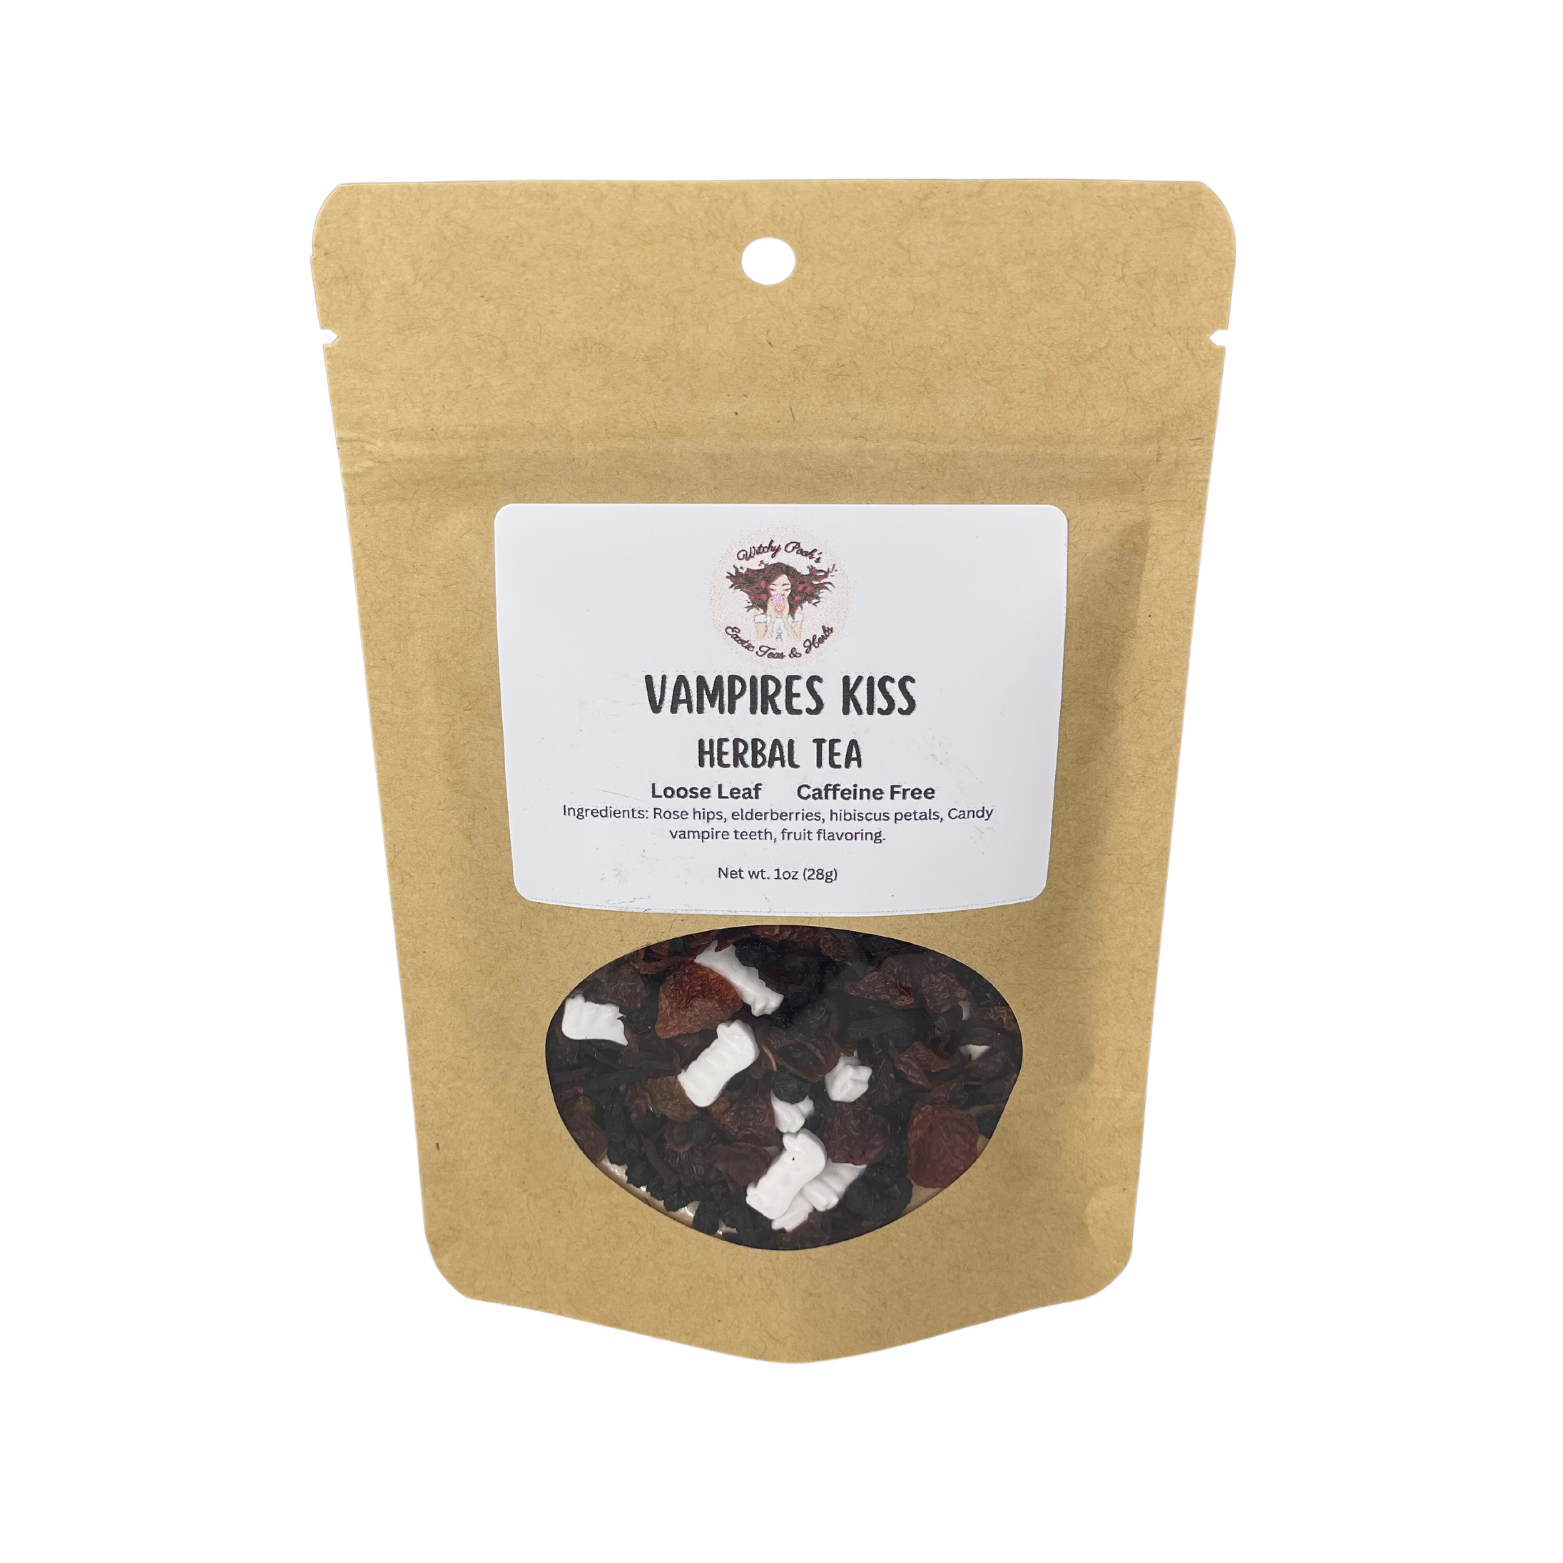 Witchy Pooh's Vampire's Kiss Loose Leaf Fruit Elderberry Herbal Tea with Candy Vampire Teeth, Caffeine Free-6